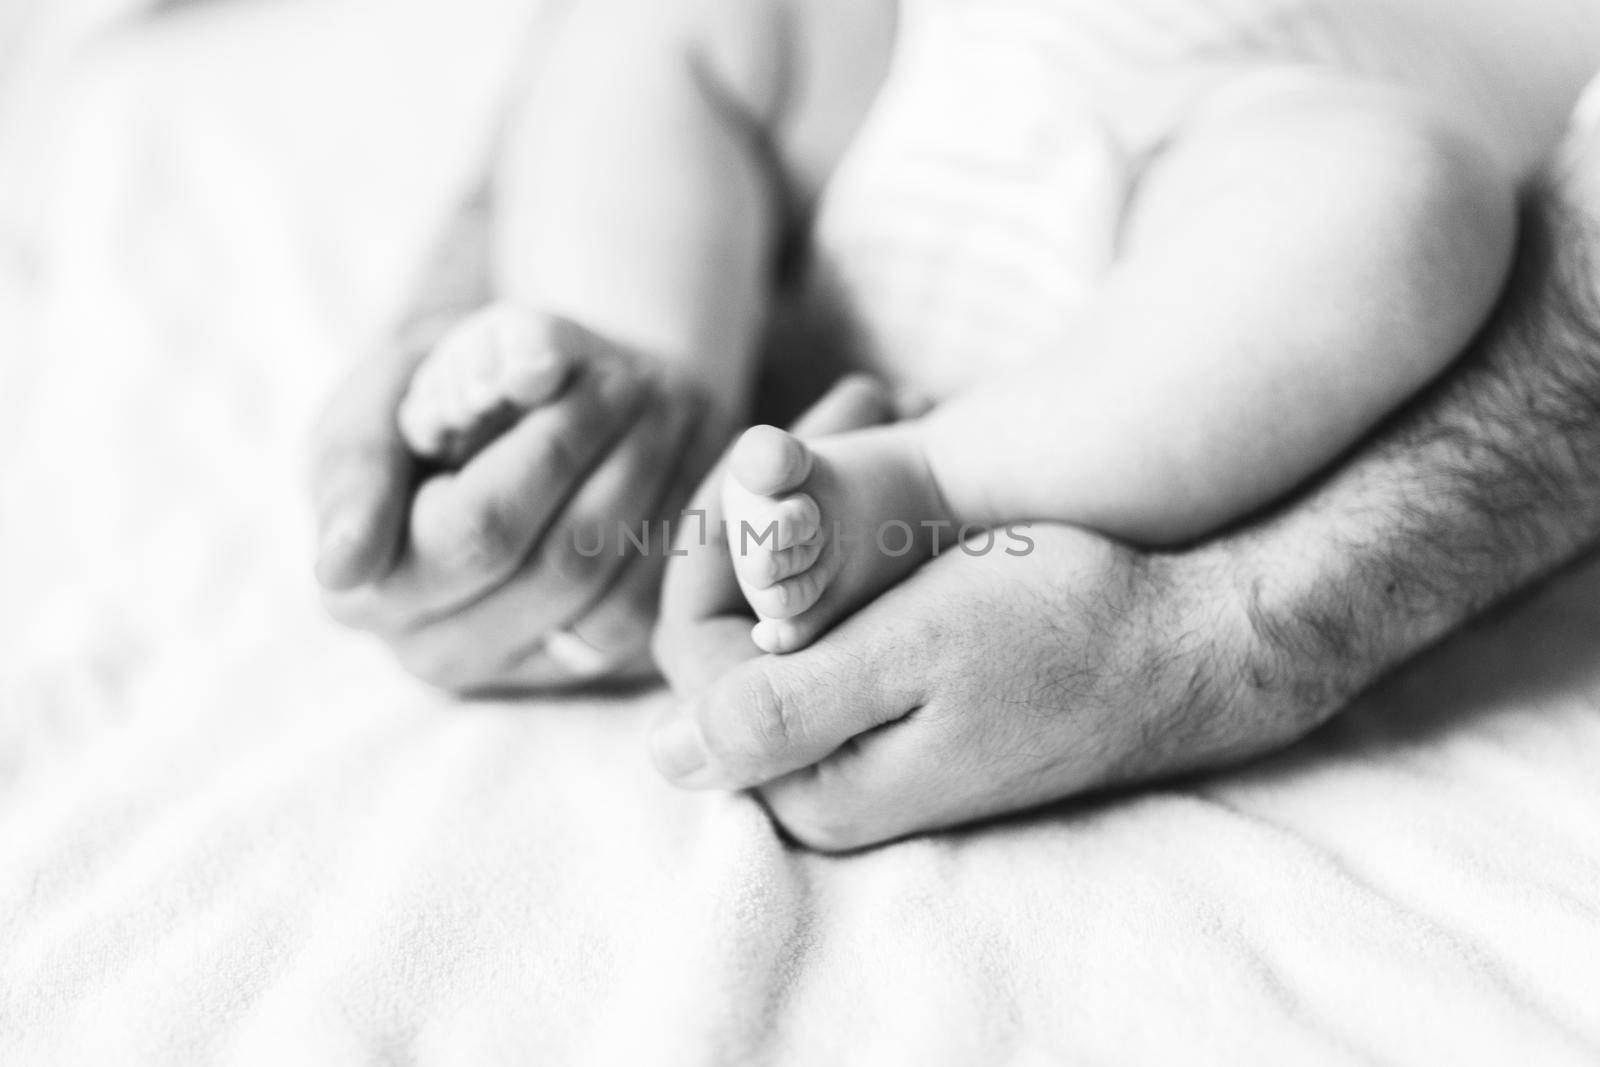 Children's feet in the hands of his father.conceptual image of fatherhood.photo with copy space